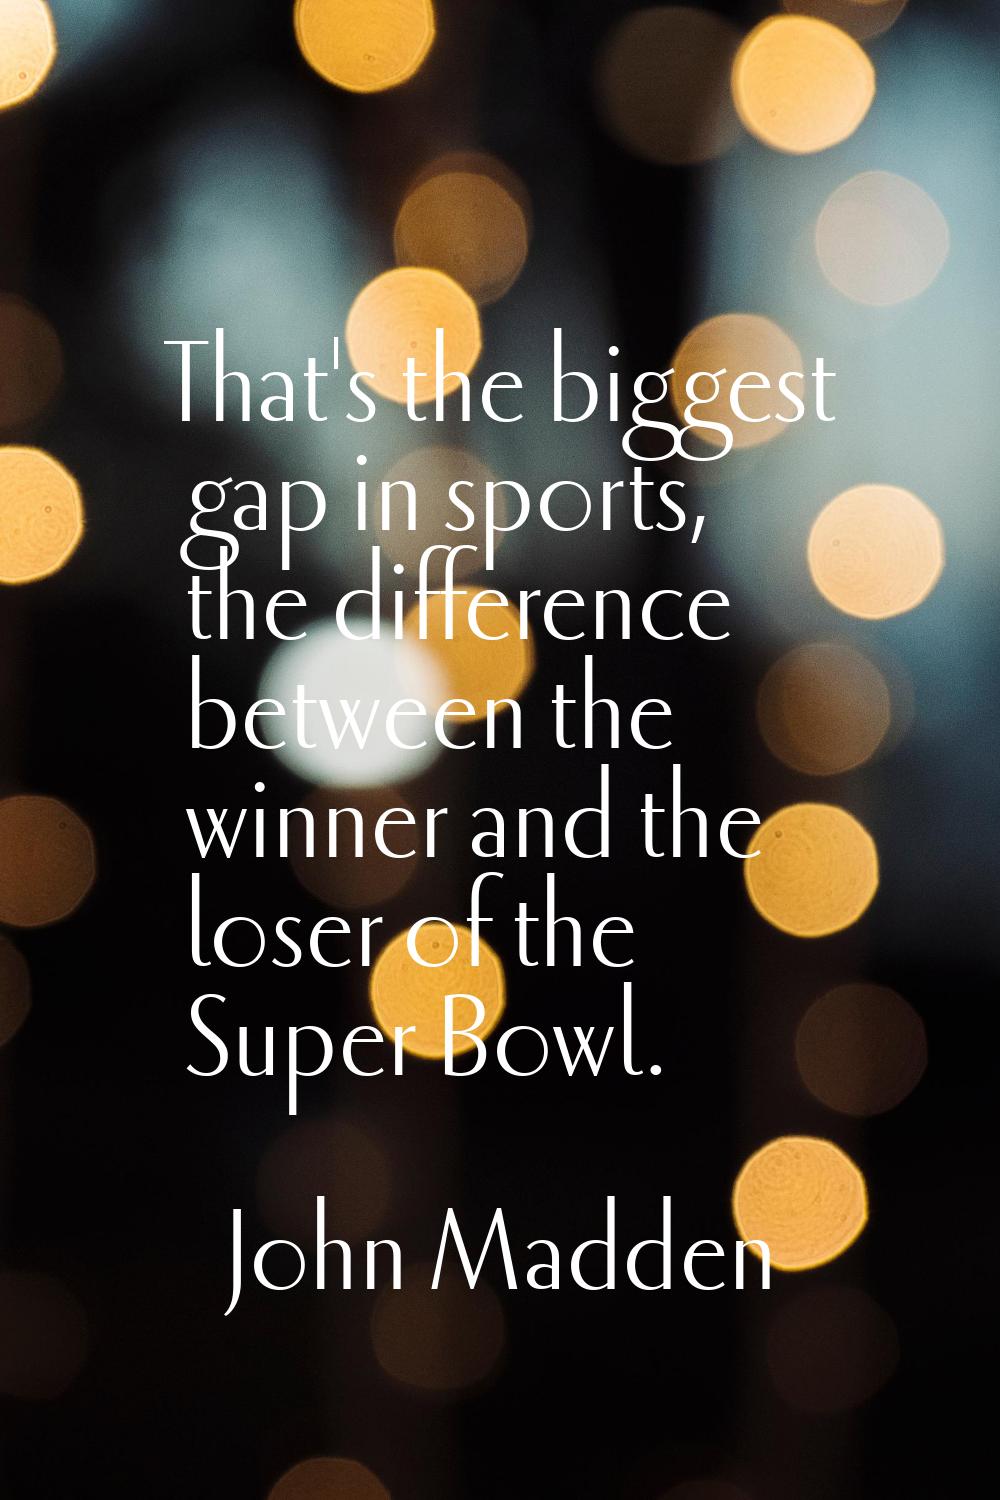 That's the biggest gap in sports, the difference between the winner and the loser of the Super Bowl